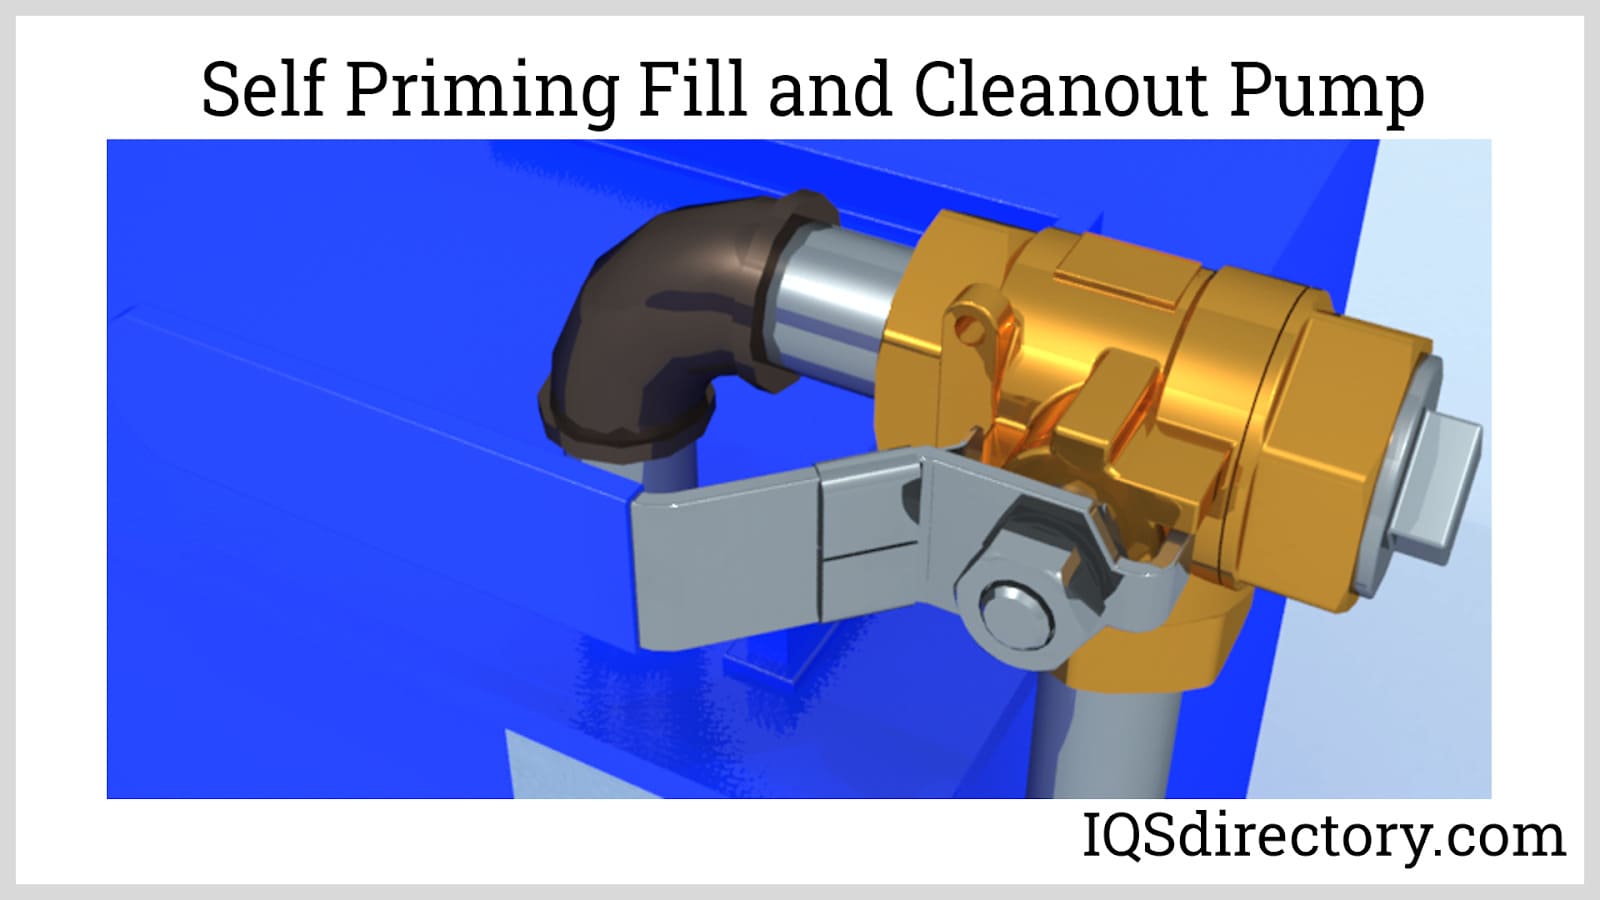 Self Priming Fill and Cleanout Pump